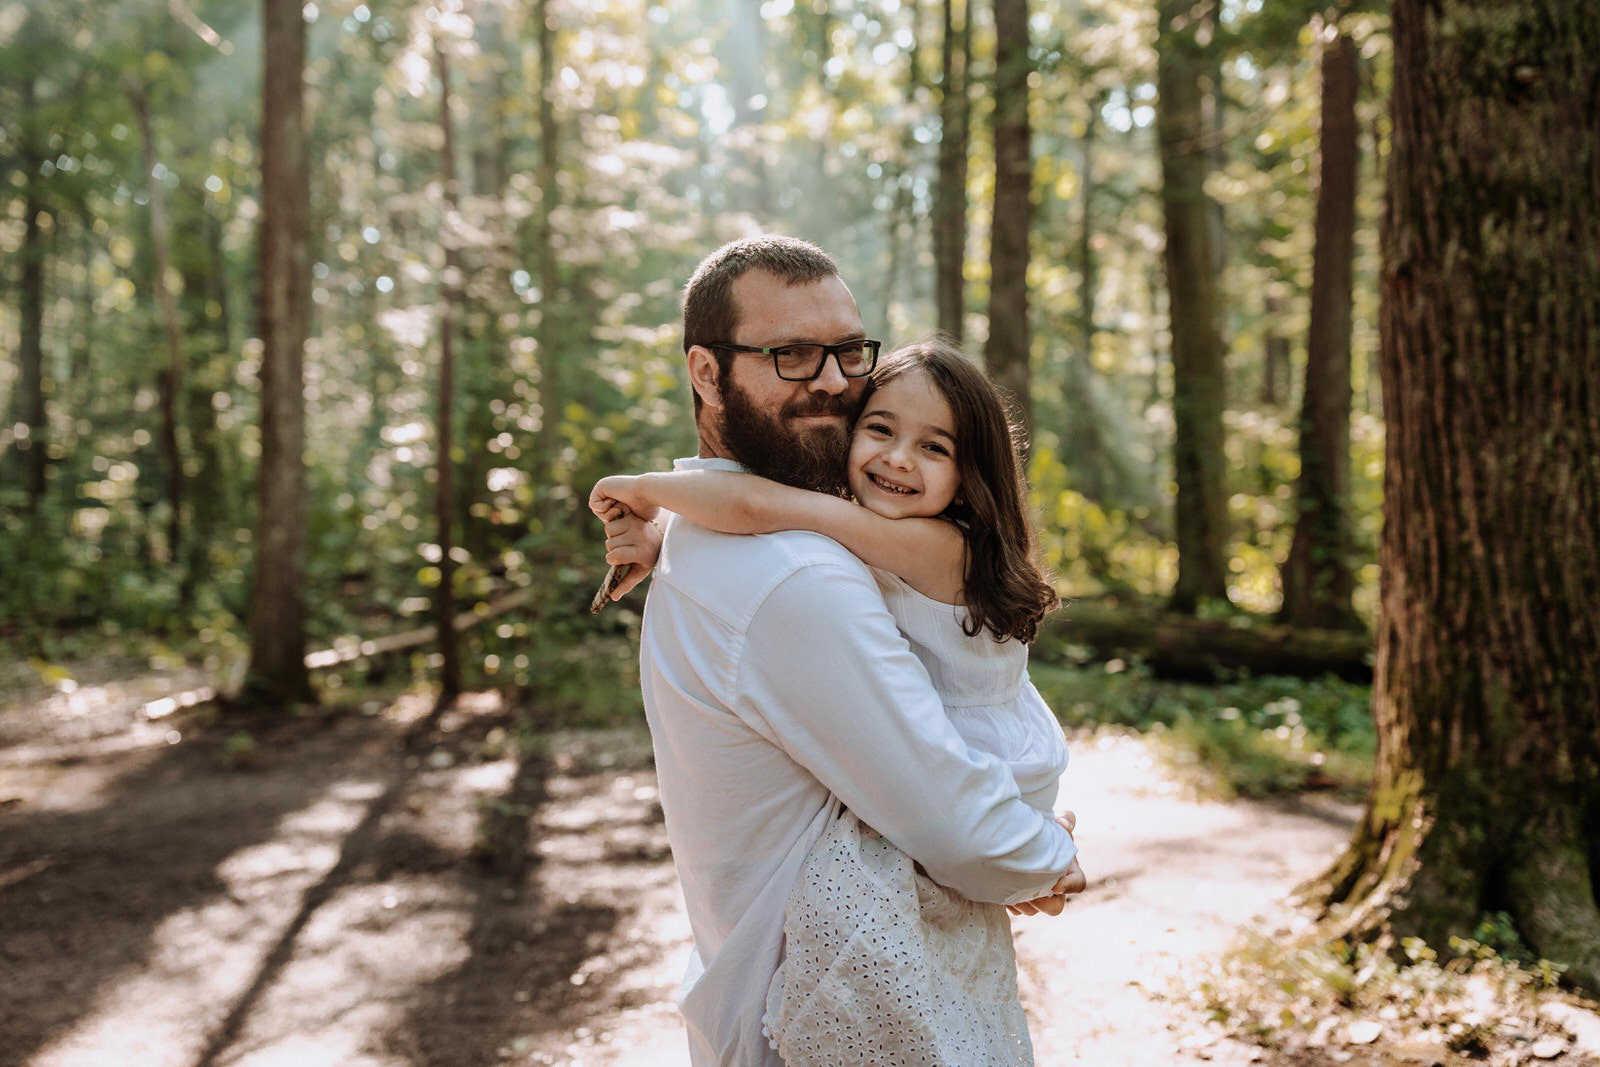 Bearded man holding his daughter and both smiling looking at the camera